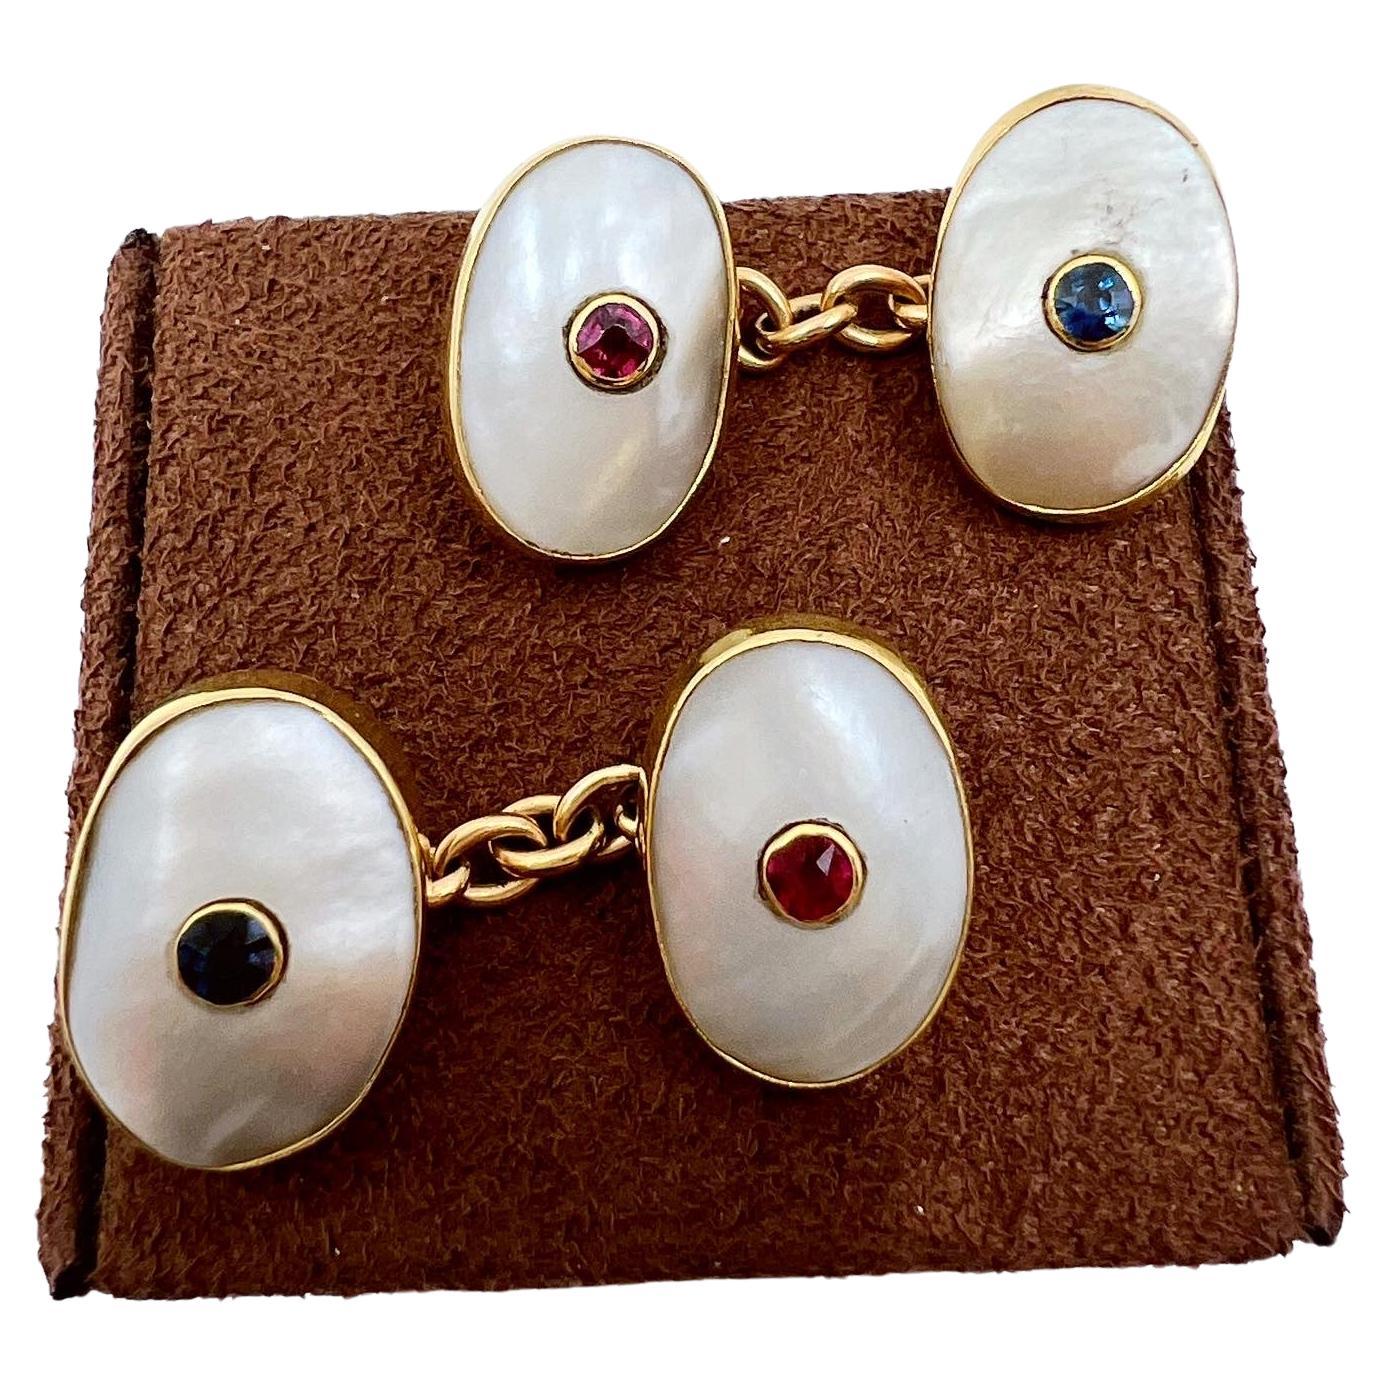 Mother of pearl, sapphires, rubies and yellow gold Cufflinks